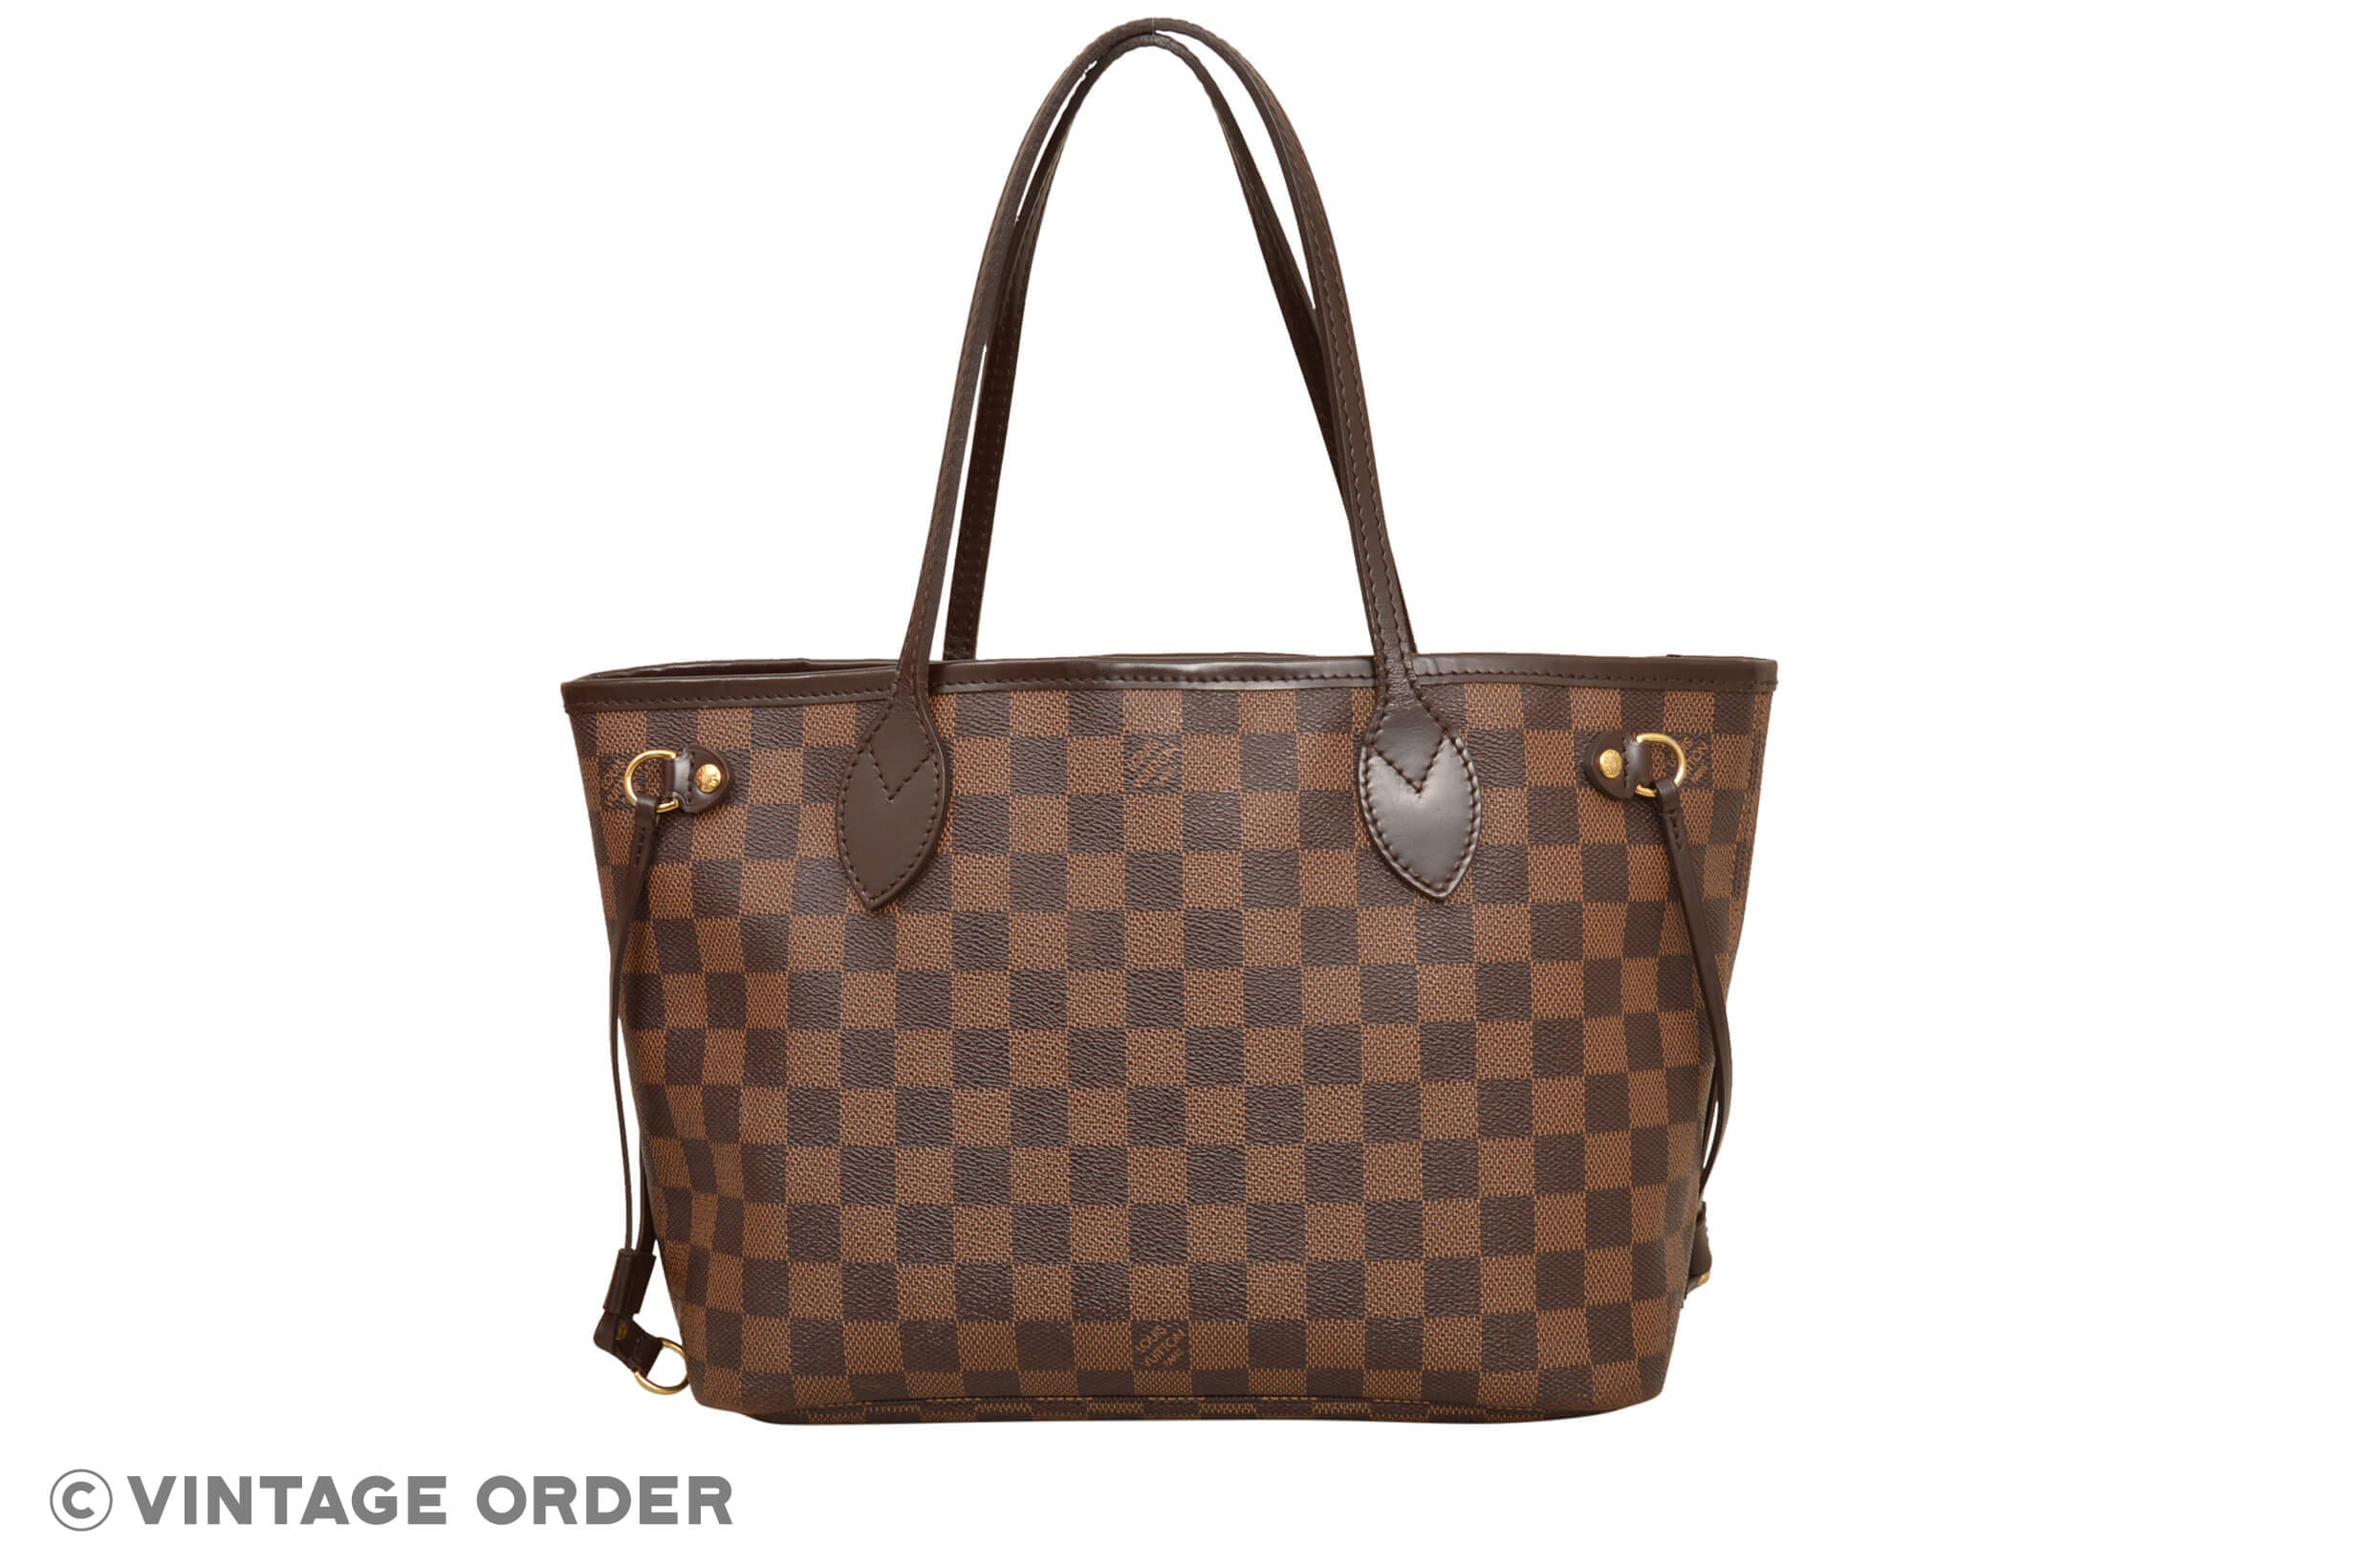 Louis Vuitton Neverfull Buy Online Uk | Confederated Tribes of the Umatilla Indian Reservation